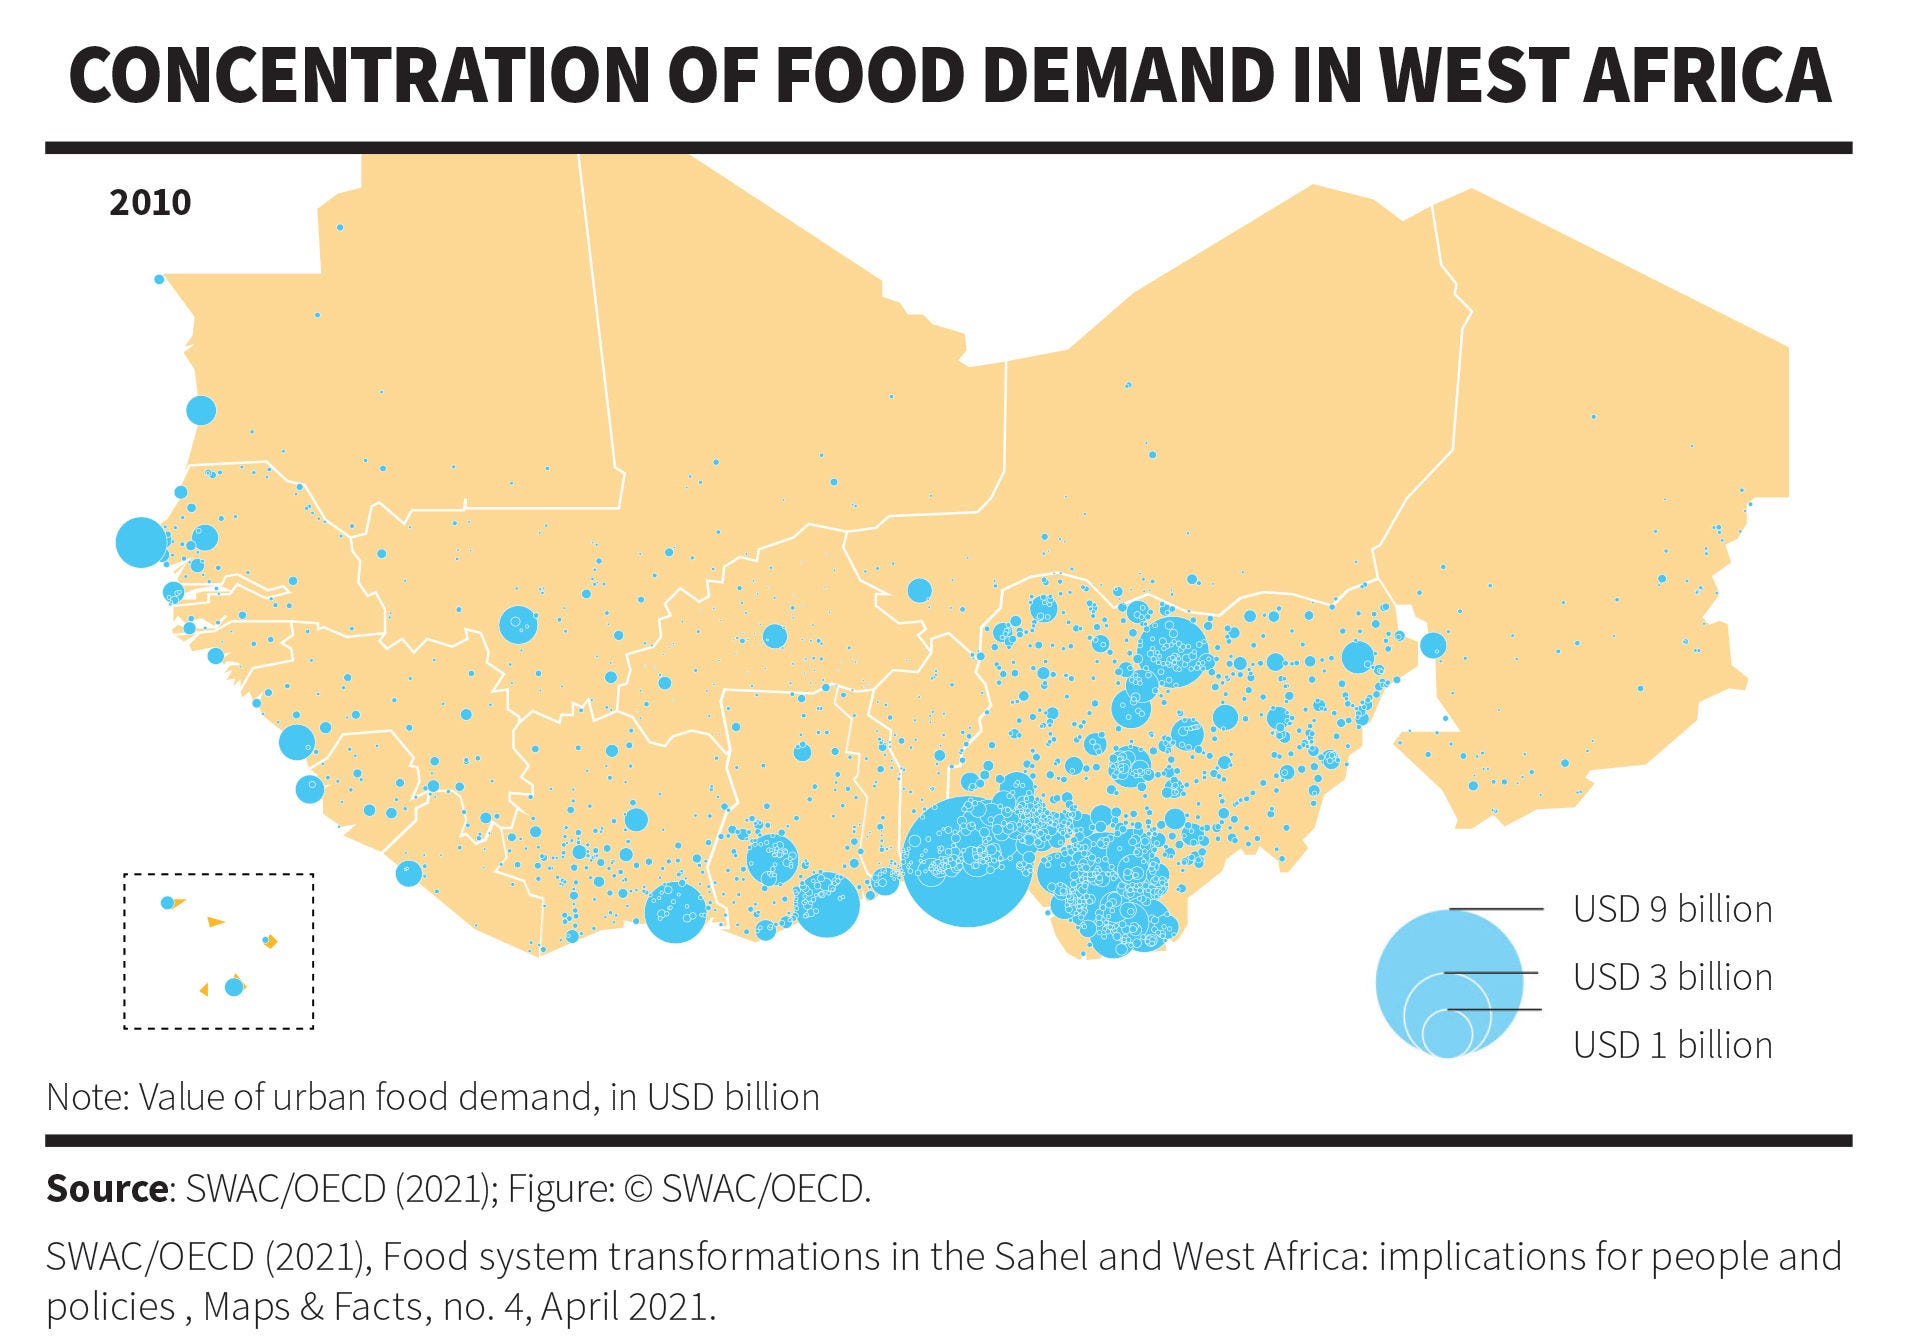 Concentration of food demand in West Africa